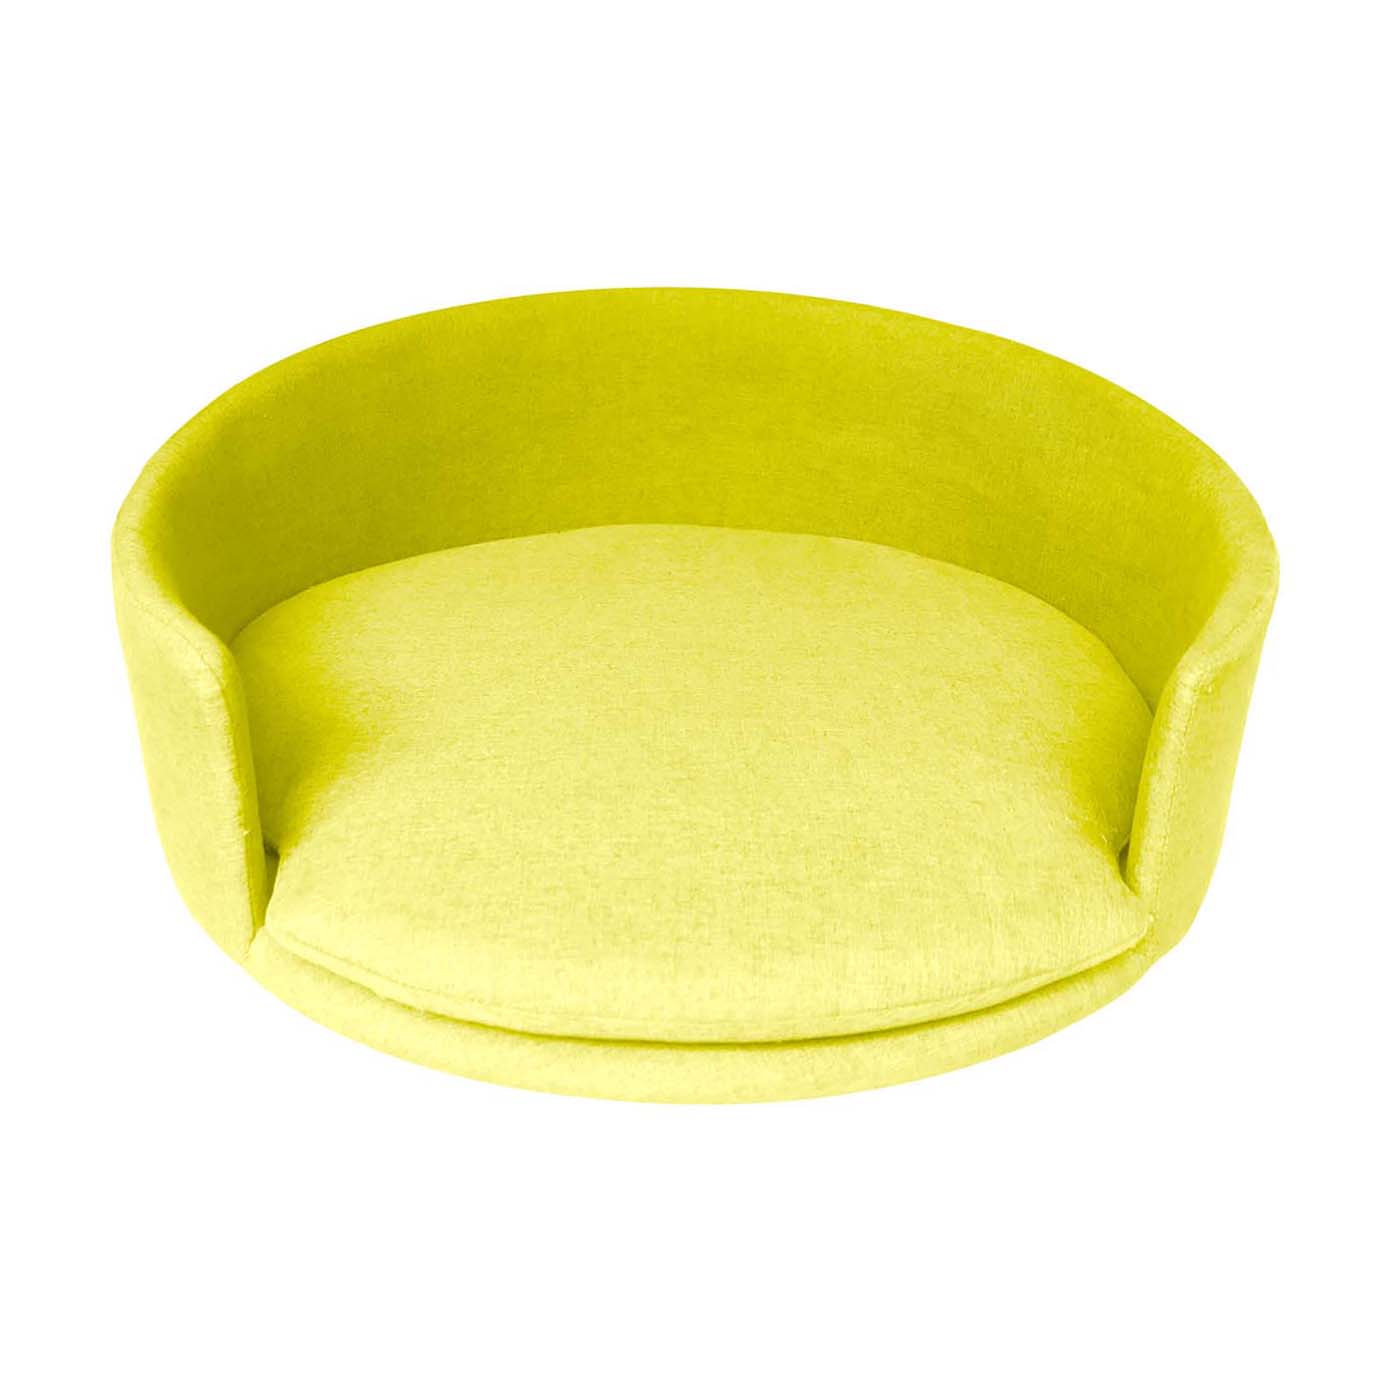 The Lime Huisdier Pet Bed